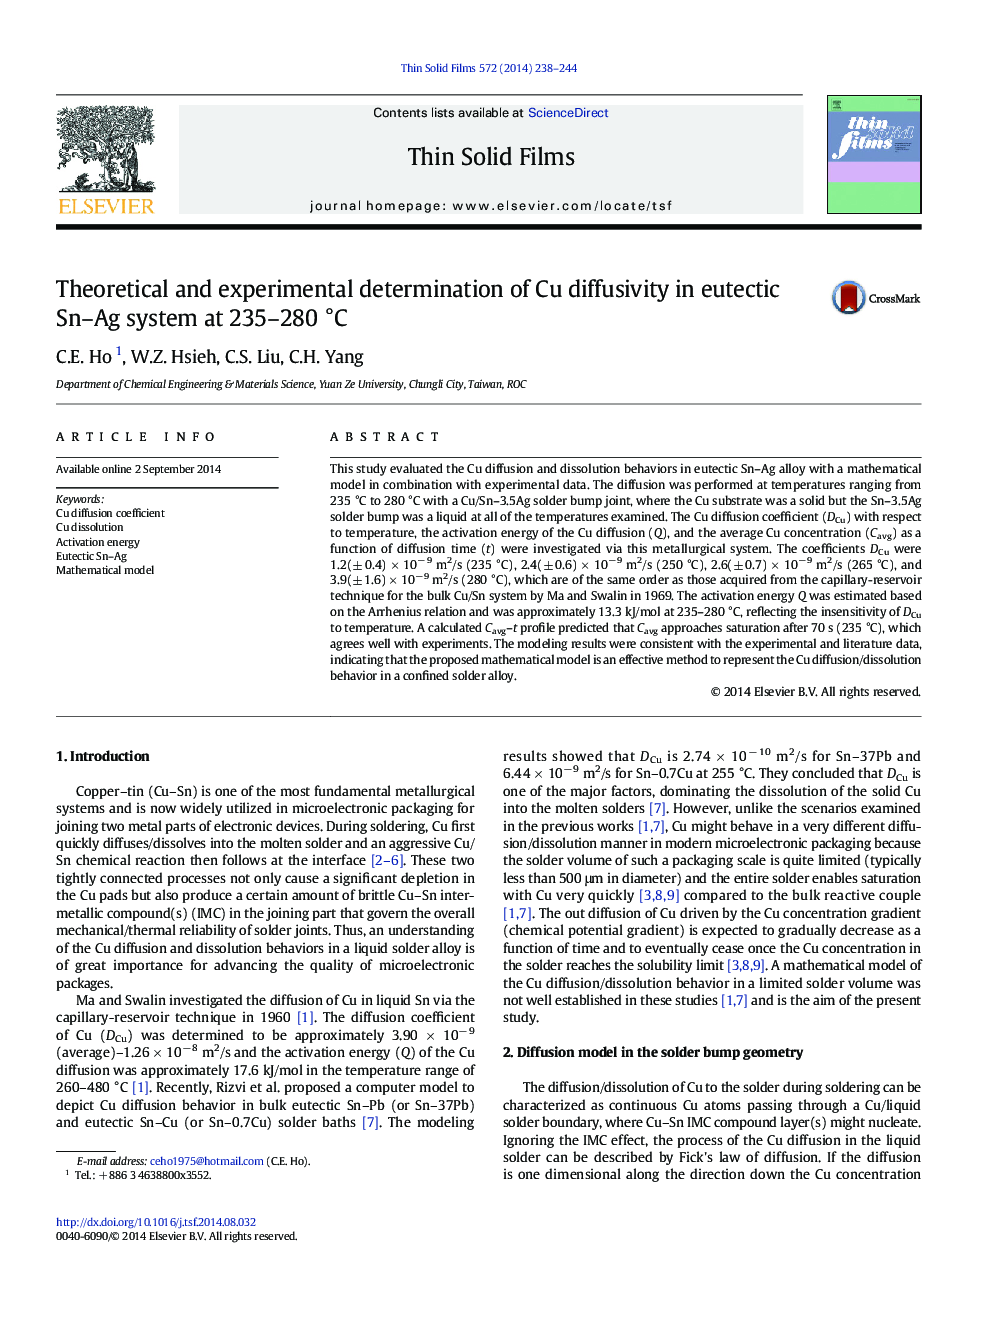 Theoretical and experimental determination of Cu diffusivity in eutectic Sn–Ag system at 235–280 °C